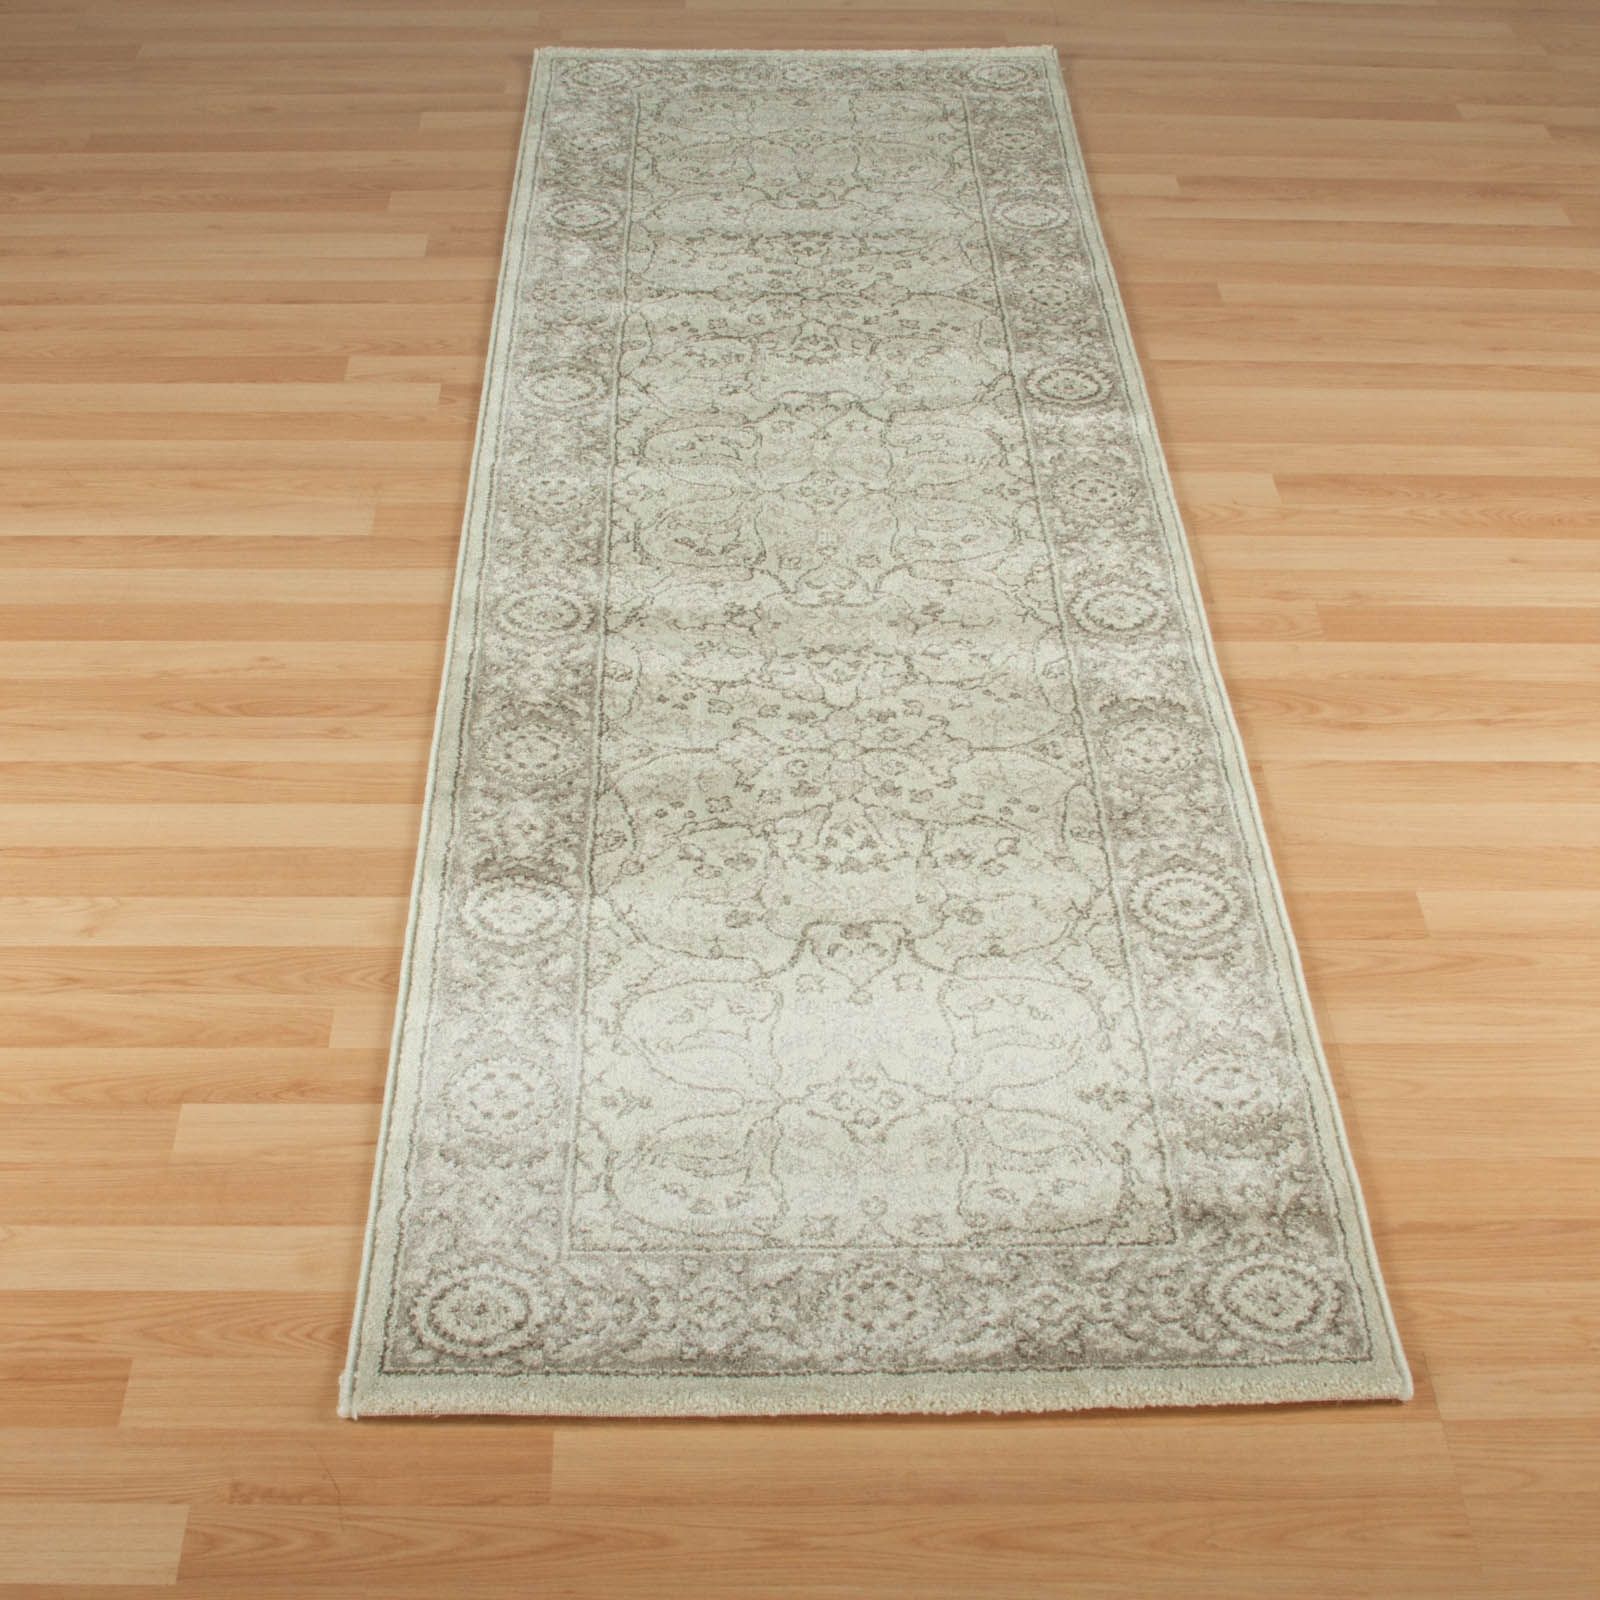 Flooring Lovely Hallway Runners For Floor Decor Idea Throughout Washable Runner Rugs For Hallways (Photo 3 of 20)